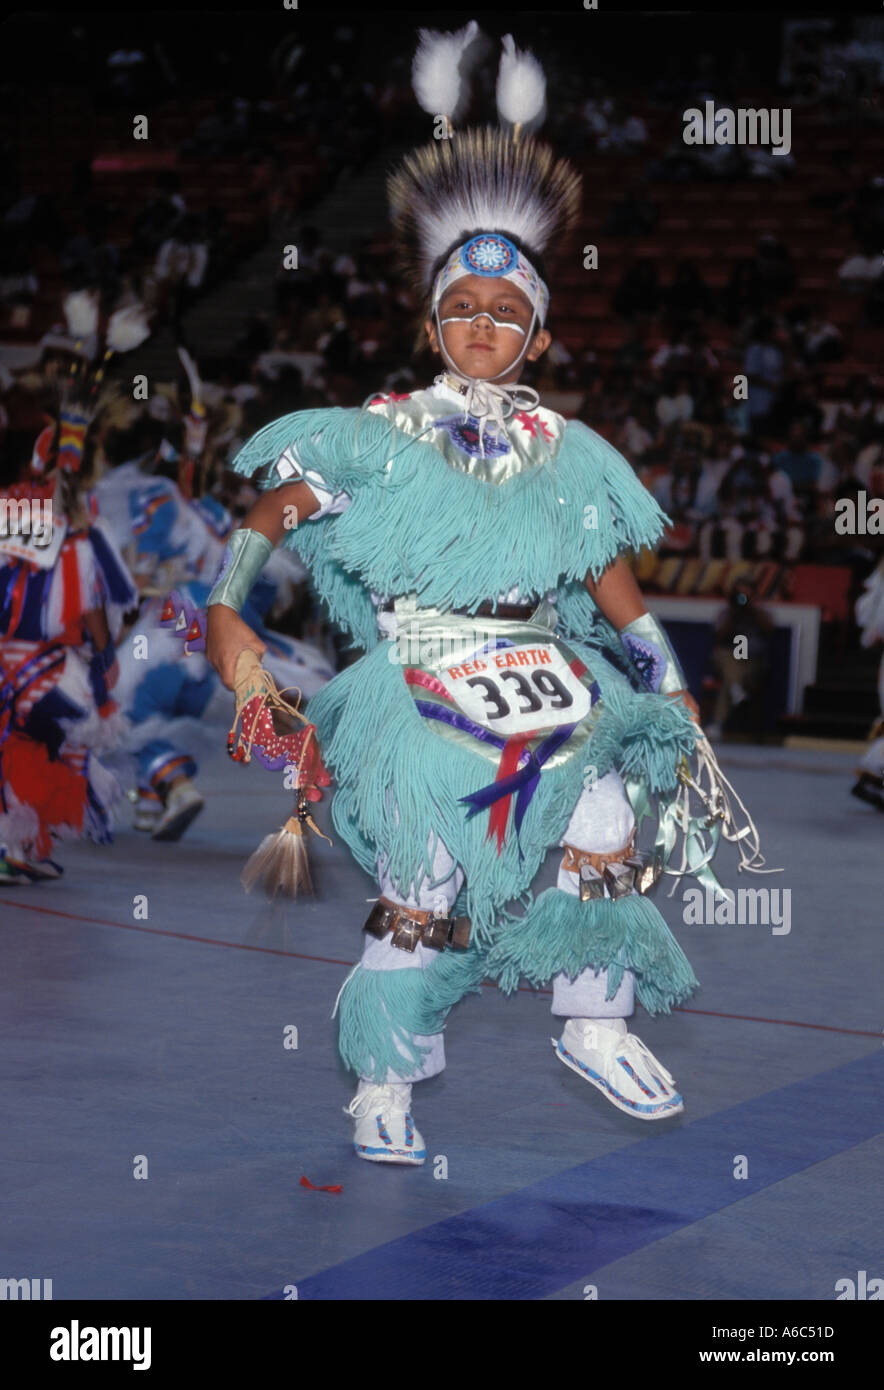 Cherokee Indian boy in costume dancing in competition at powwow Red Earth festival tribal dance Stock Photo